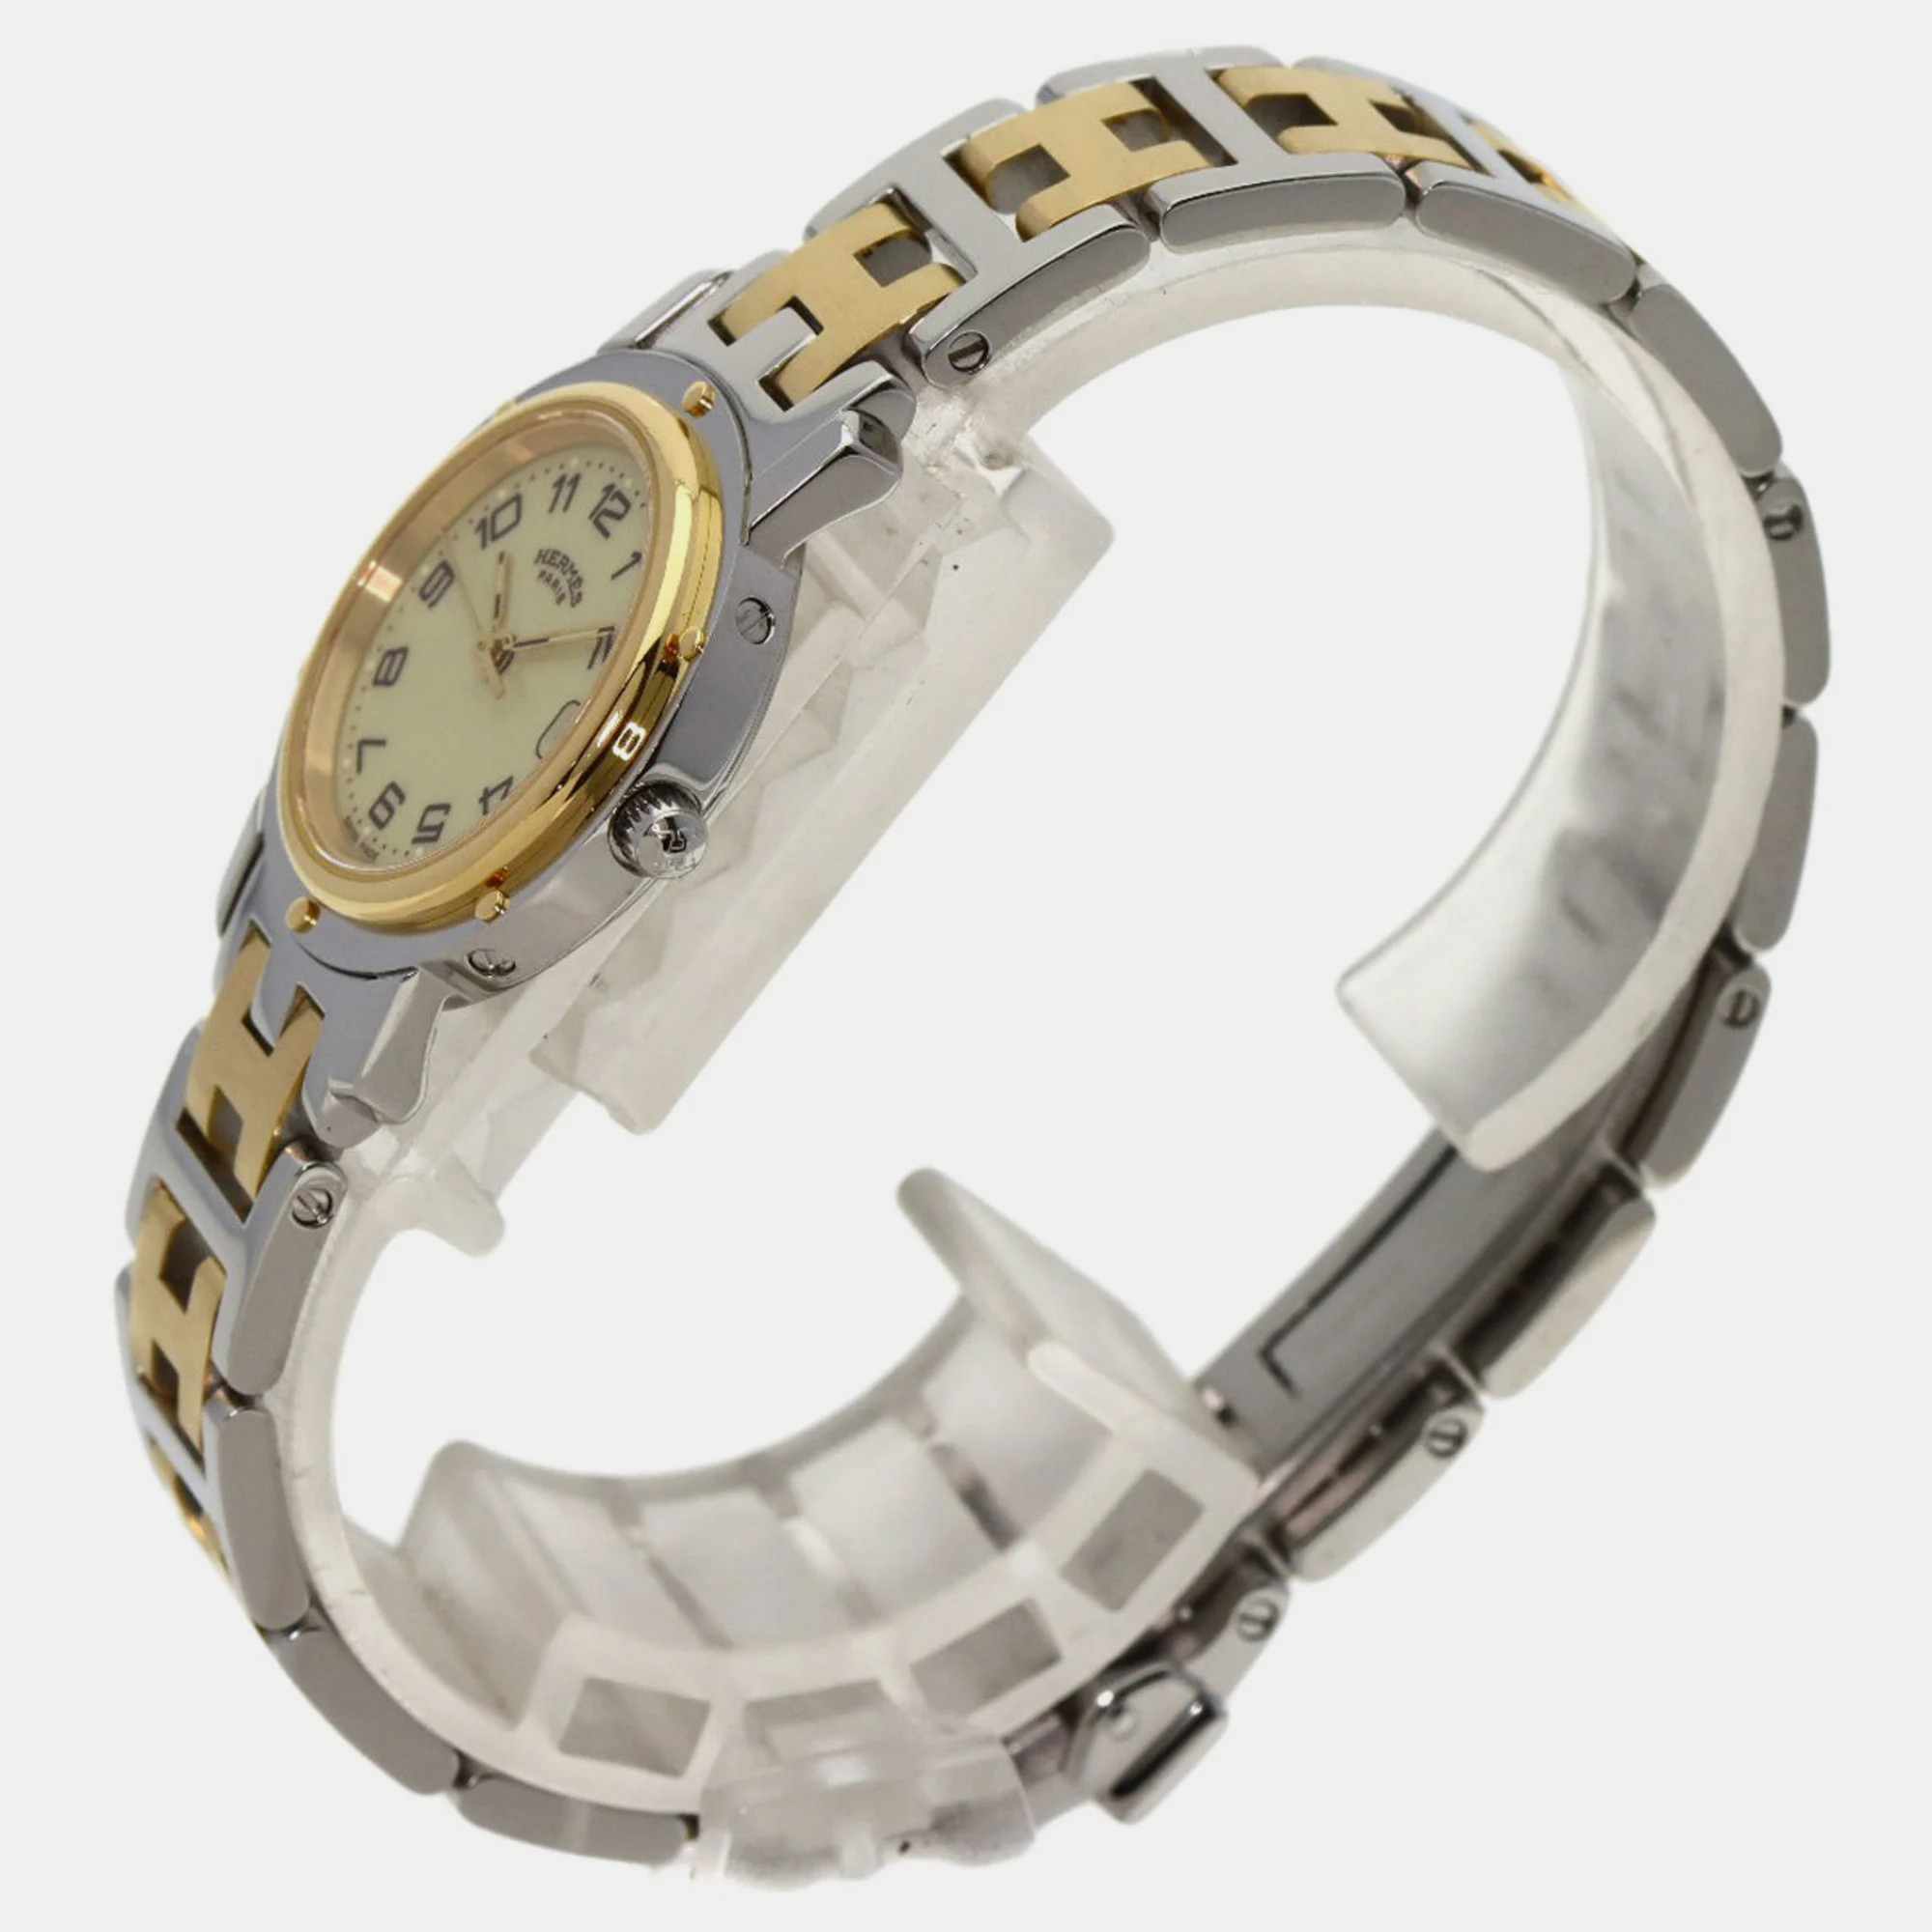 Hermes Champagne Yellow Gold Plated And Stainless Steel Clipper CL4.220 Quartz Women's Wristwatch 24 Mm